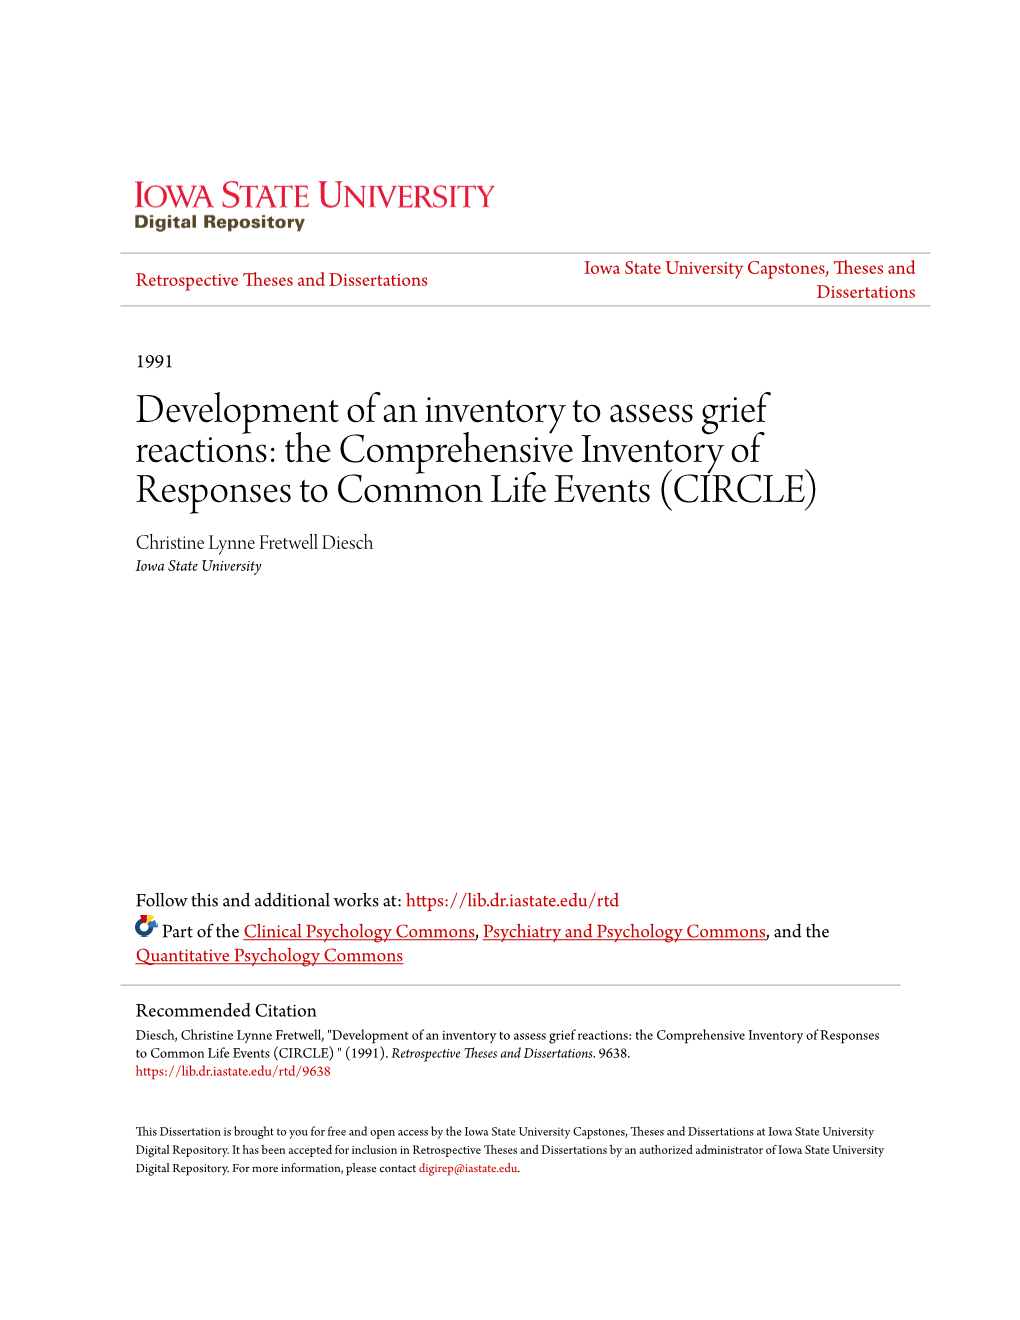 Development of an Inventory to Assess Grief Reactions: The